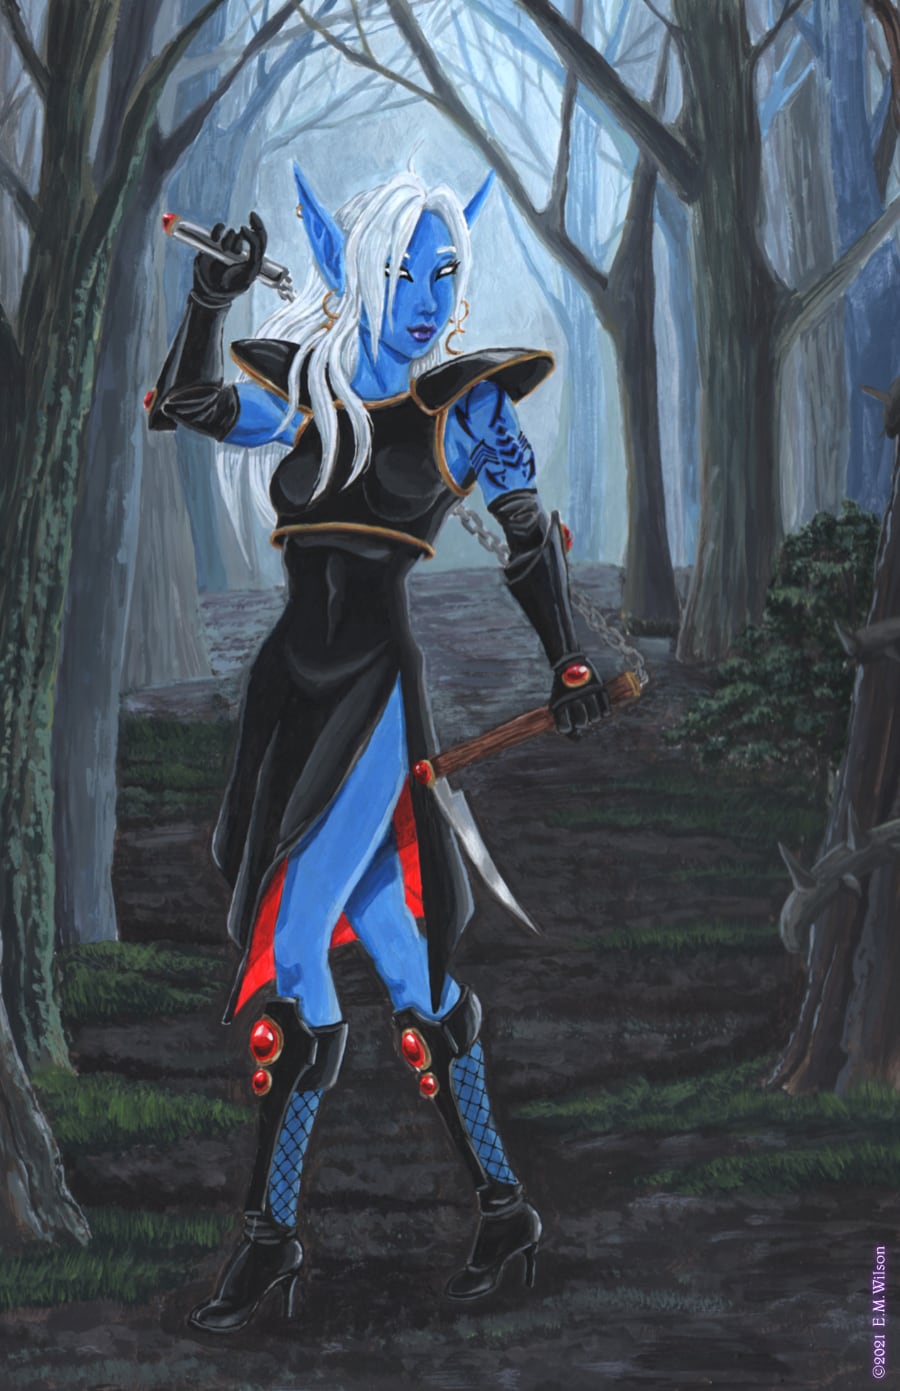 Painting by Erick Wilson. In a dark forest with looming, but bare trees, stands a female drow with white hair and blue skin. She is wearing a silk black dress. She is posing with a weapon, a Kusari-gama named “Whiplash”, and has chest-plate armor with shoulder pieces made from Kal-Ensit steel, and gloves and boots wtih large, round red gems socketed in them.